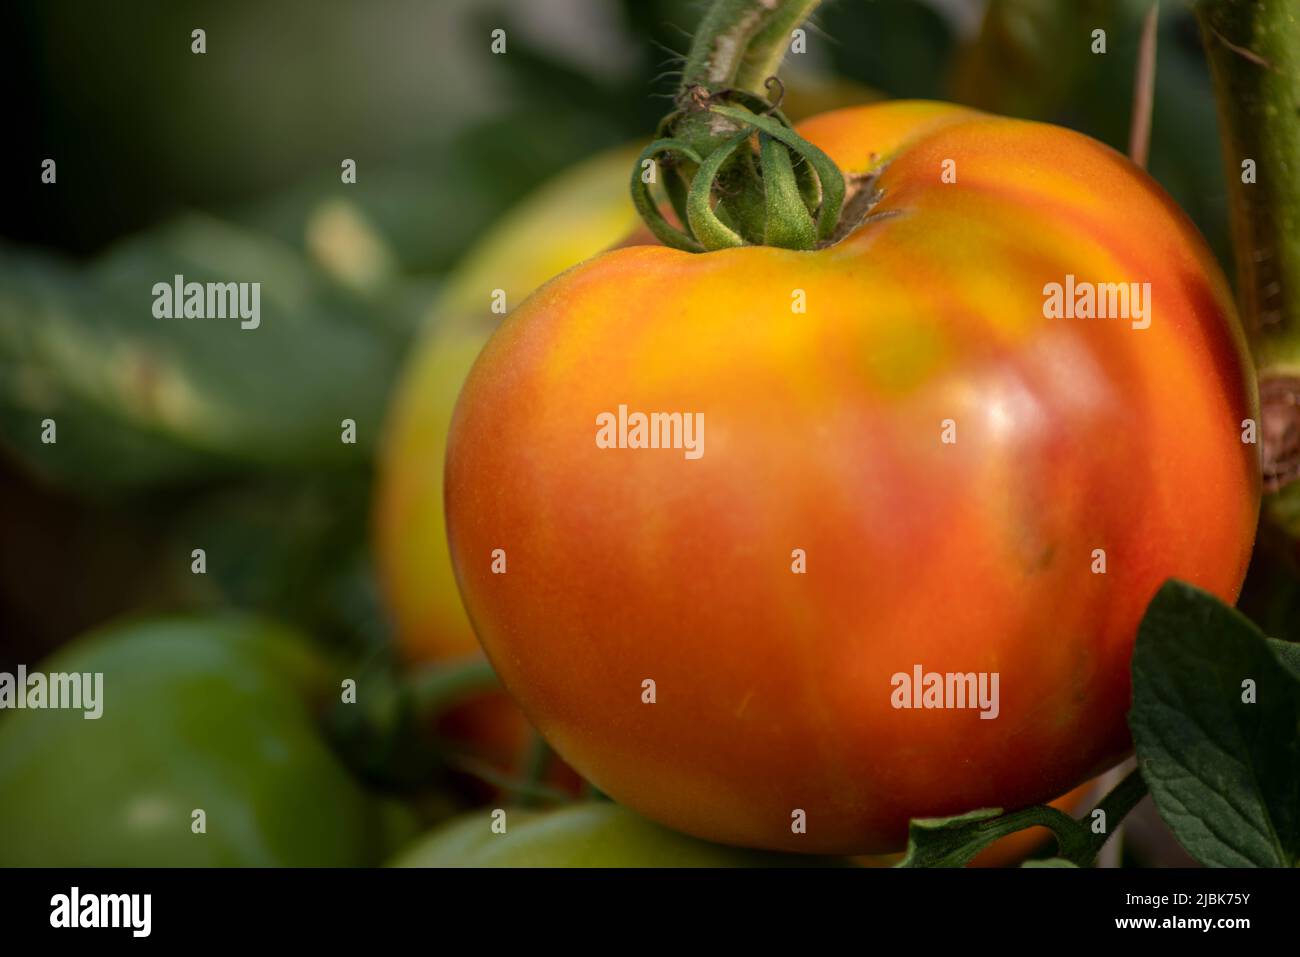 Organic greenhouse tomatoes ripen in this full frame image shot in natural light. Green agricultural background. Stock Photo